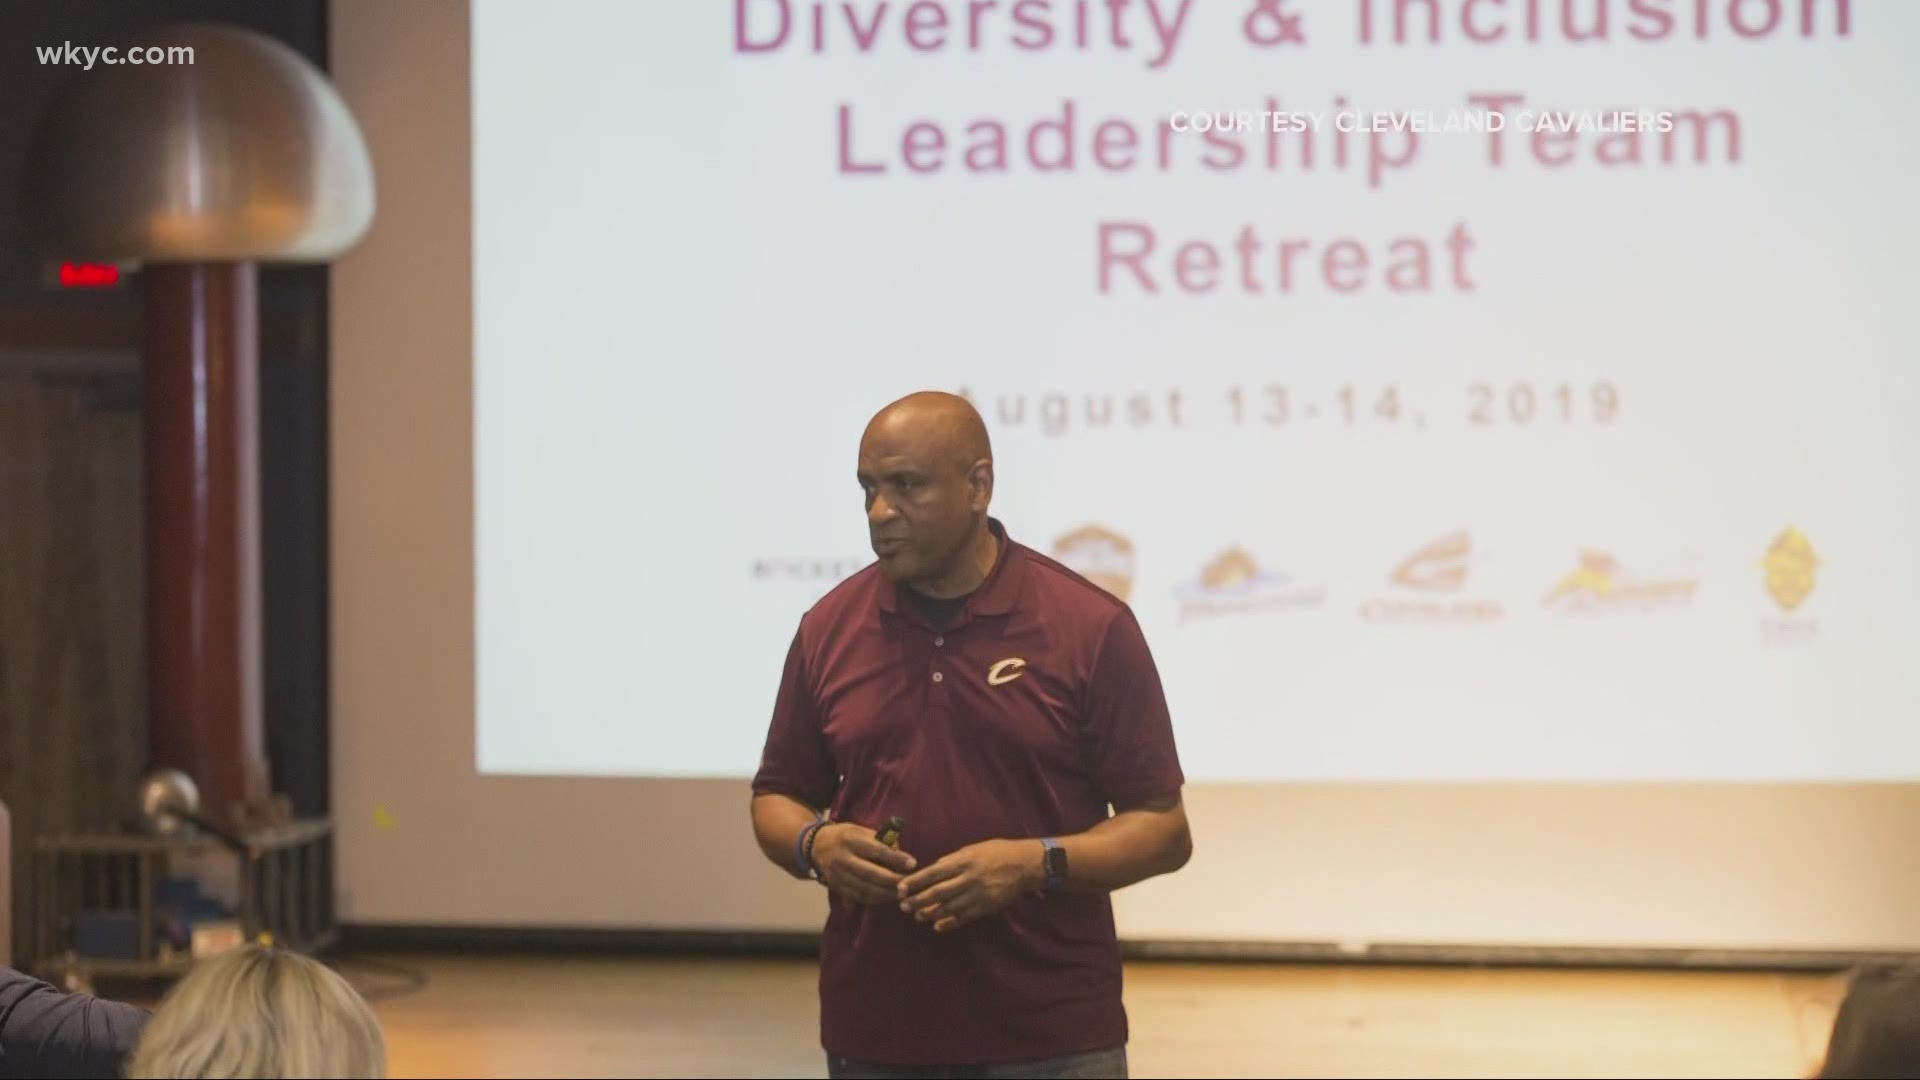 Clayton is passionate about his Cleveland Cavaliers. In his role, he makes sure the Cavs organization is maintaining its commitment to important social issues.